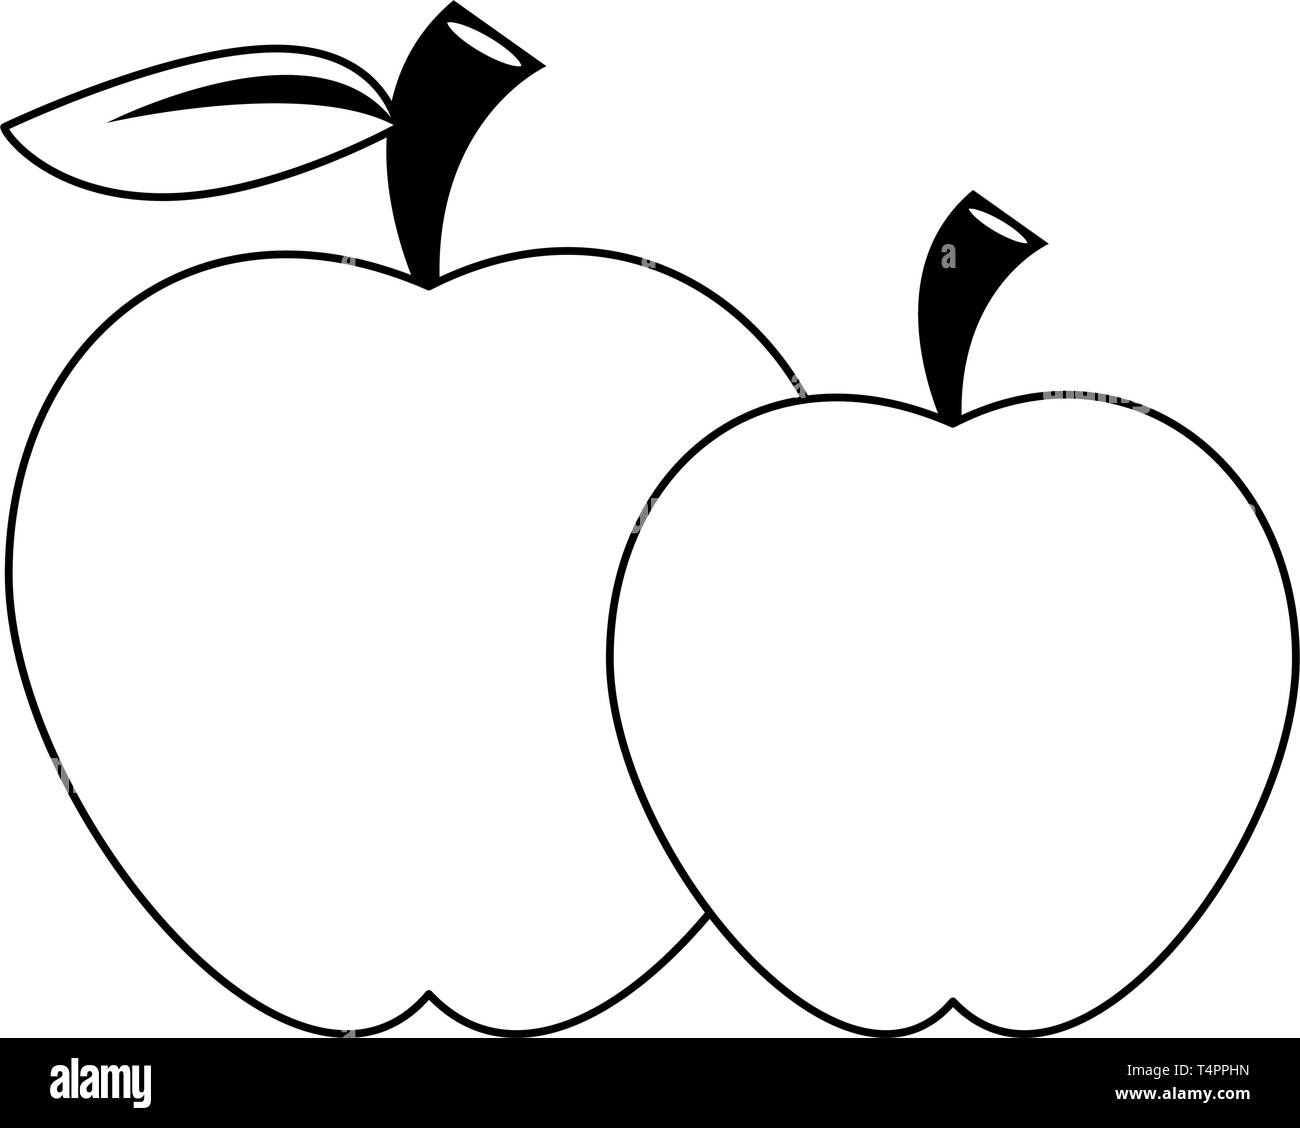 Apples red and green fruits in black and white Stock Vector